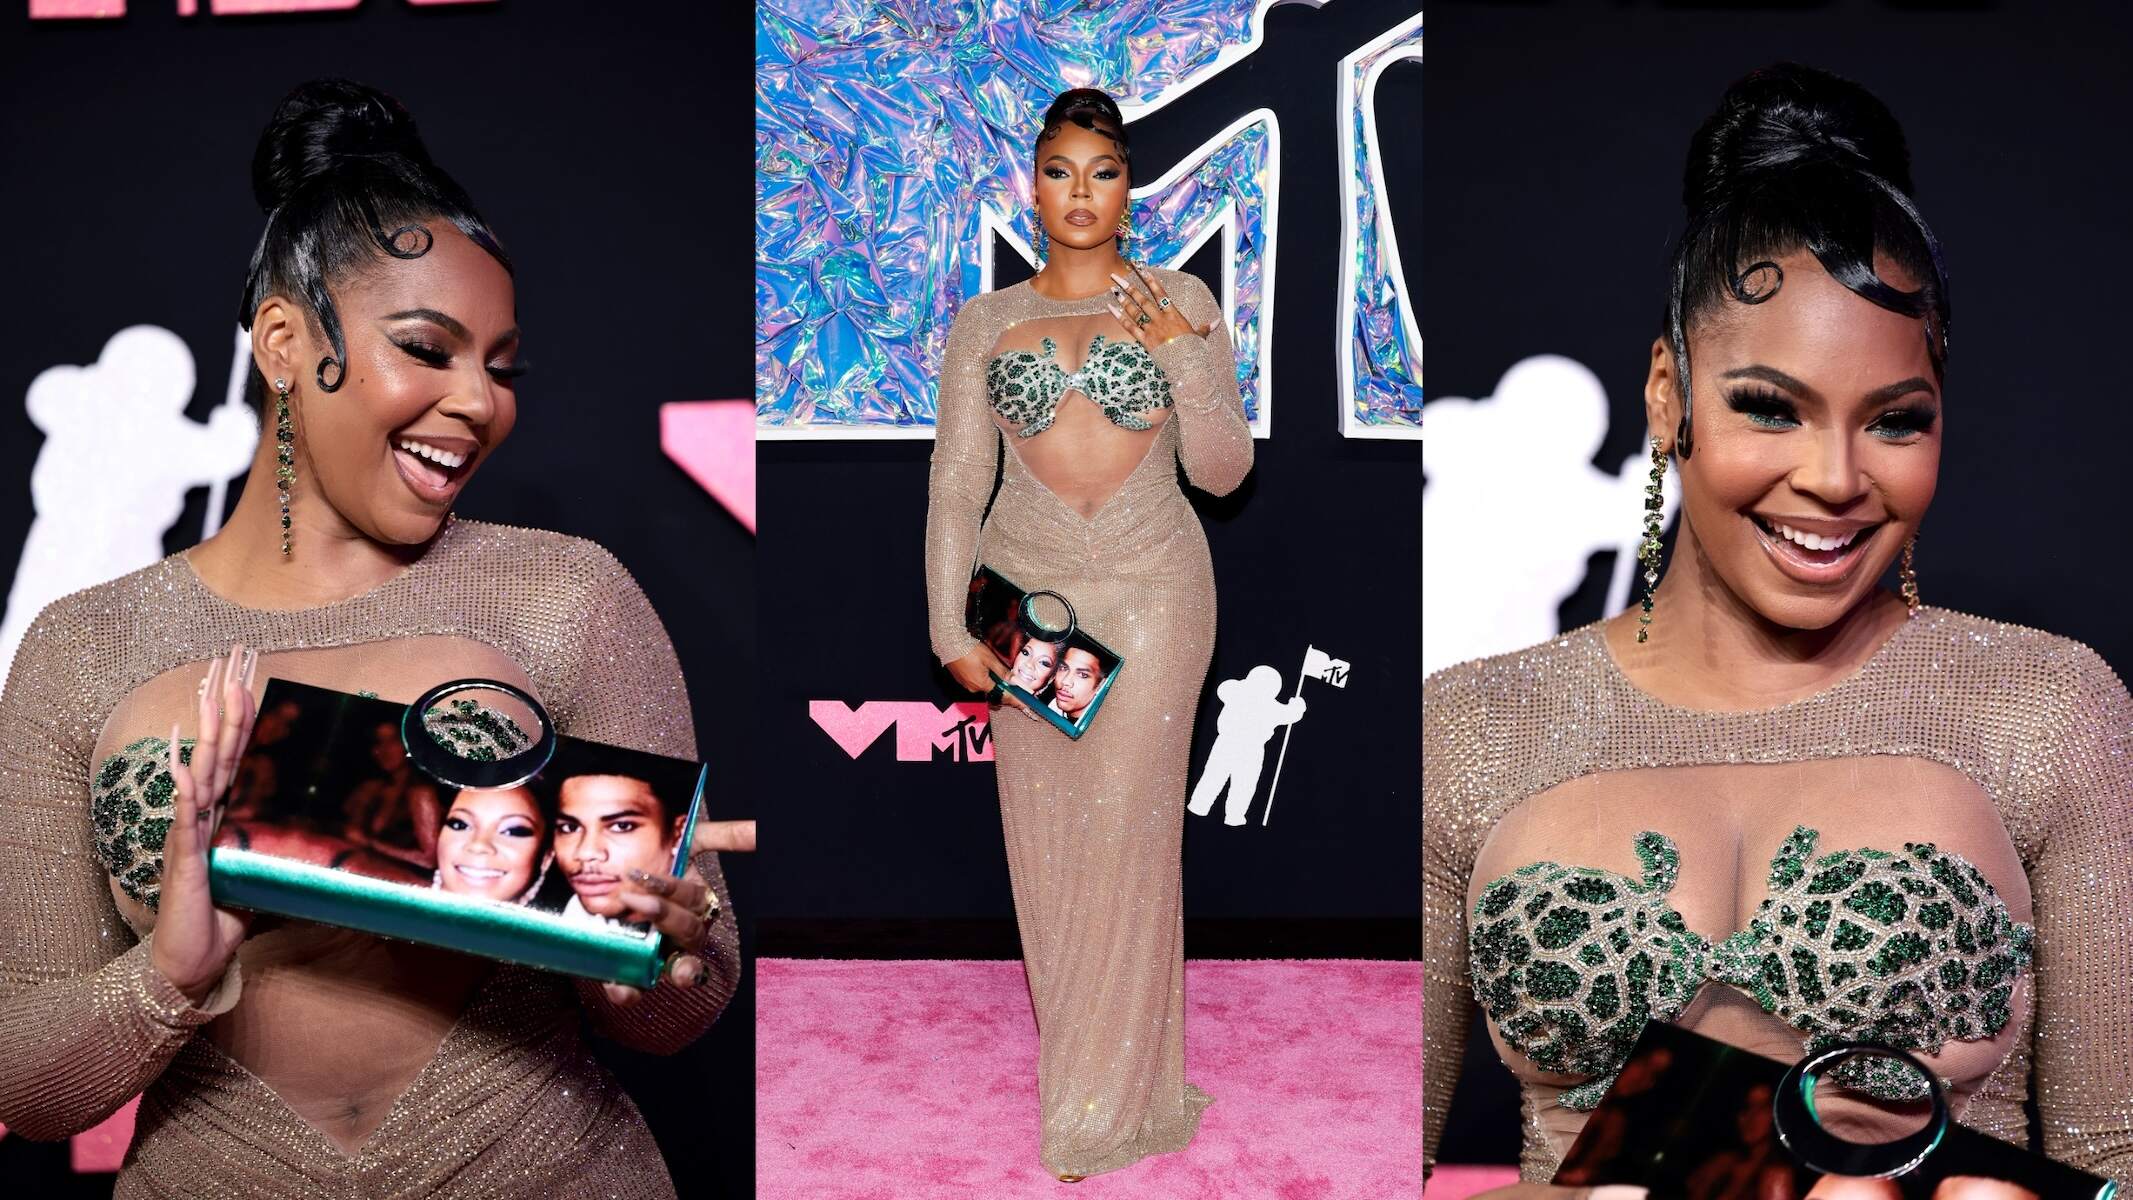 Wear a gold dress at the 2023 VMAs, Ashanti holds a purse with a photo of her and Nelly on it